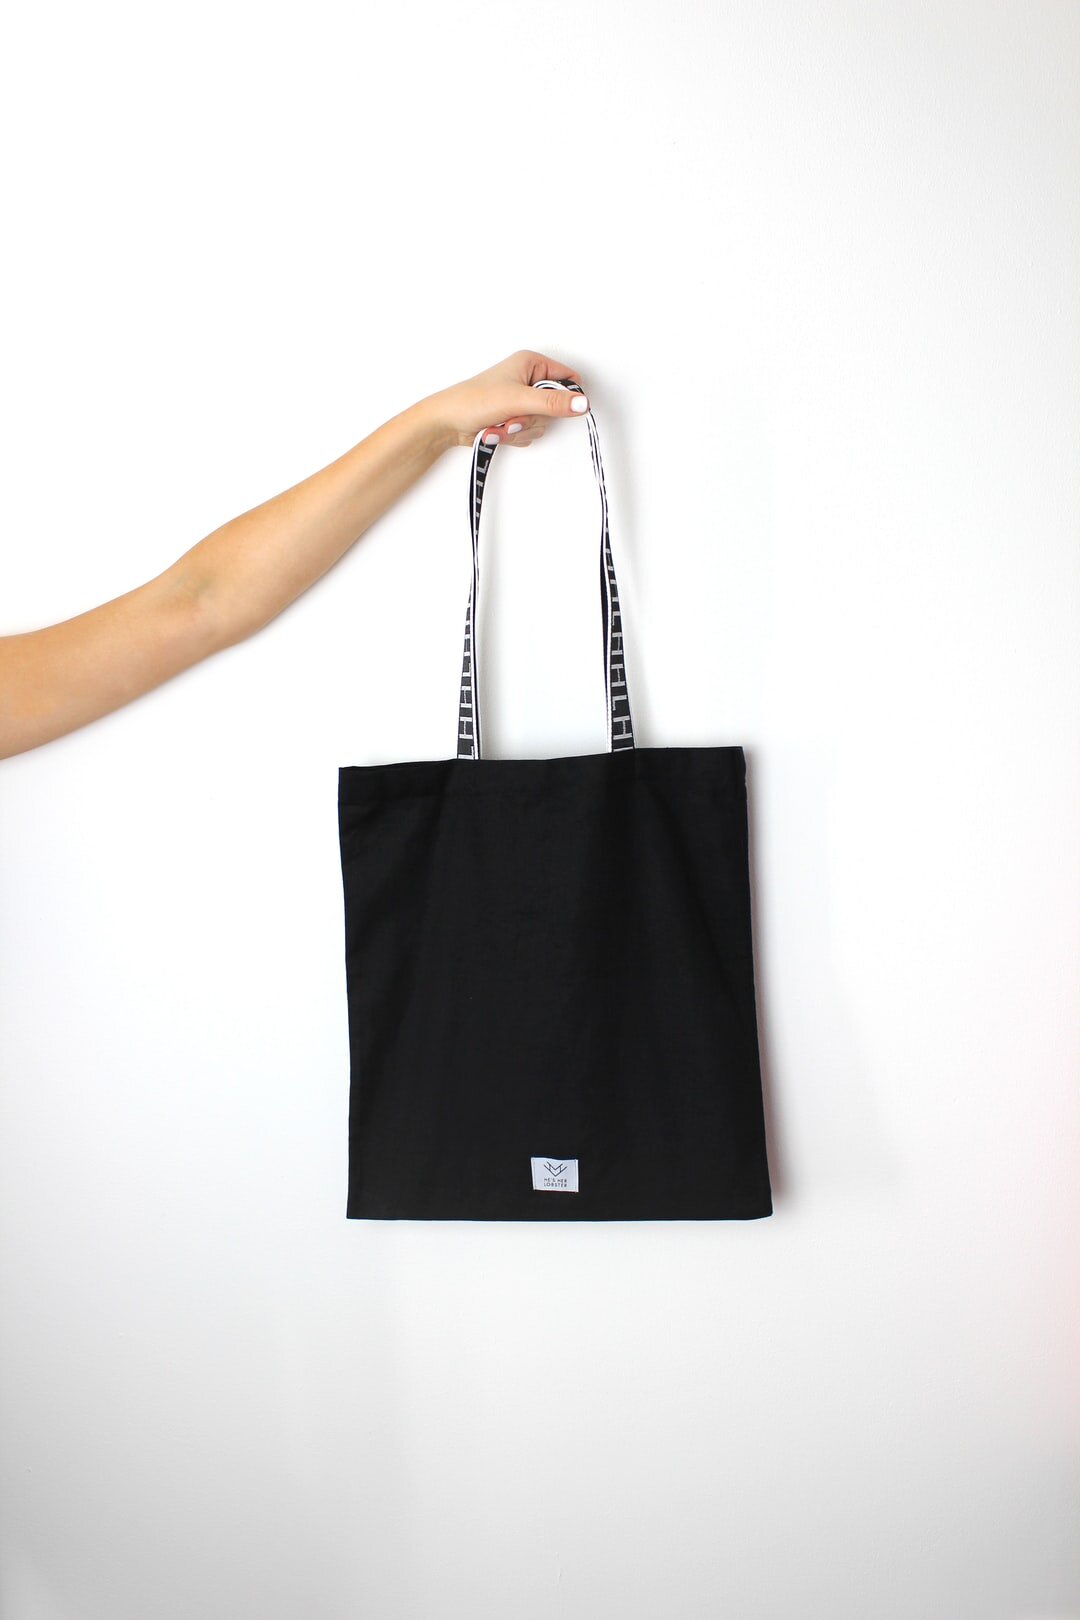 person holding black tote bag